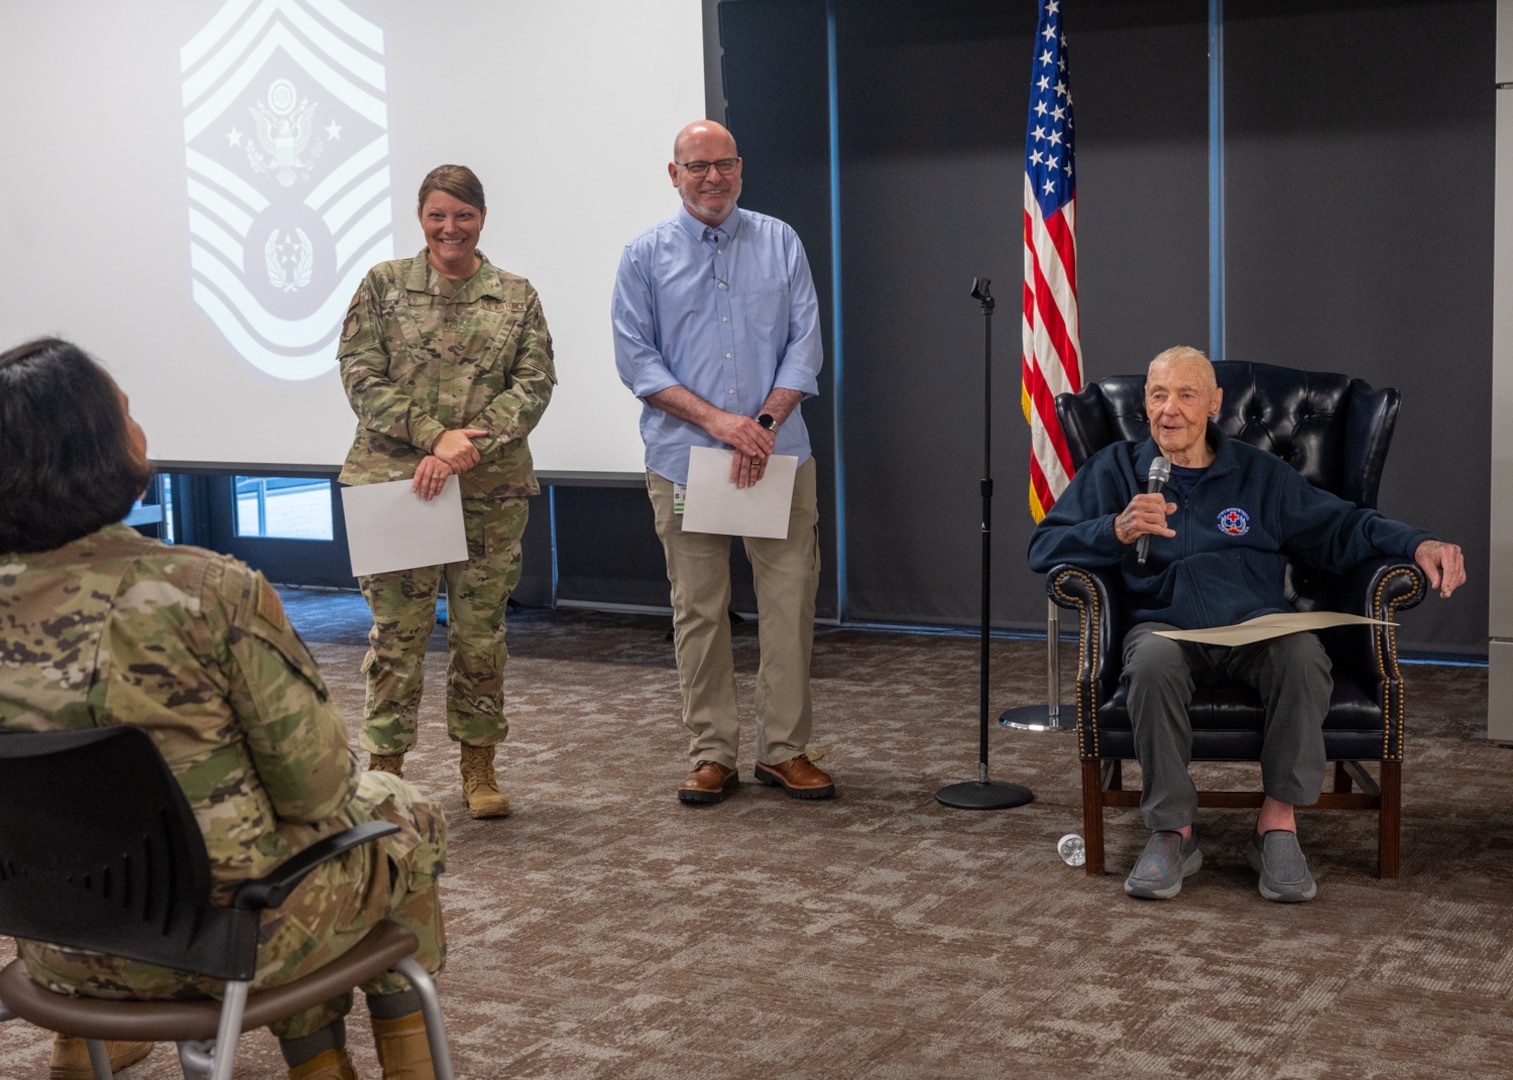 Chief Master Sergeant of the Air Force #5 (ret.) Robert Gaylor presents Chief Master Sgt. Kristy Earls, 59th Medical Wing command chief (left), and Cody Kirksey, 59th MDW protocol chief (middle), with a memo he wrote, Bob Gaylor’s 25 Words, at Wilford Hall Ambulatory Surgical Center, Joint Base San Antonio-Lackland, Texas, Aug. 2, 2023. Gaylor became Chief Master Sergeant of the Air Force on Aug. 1, 1977 and retired July 31, 1979. (U.S. Air Force photo by Senior Airman Melody Bordeaux)